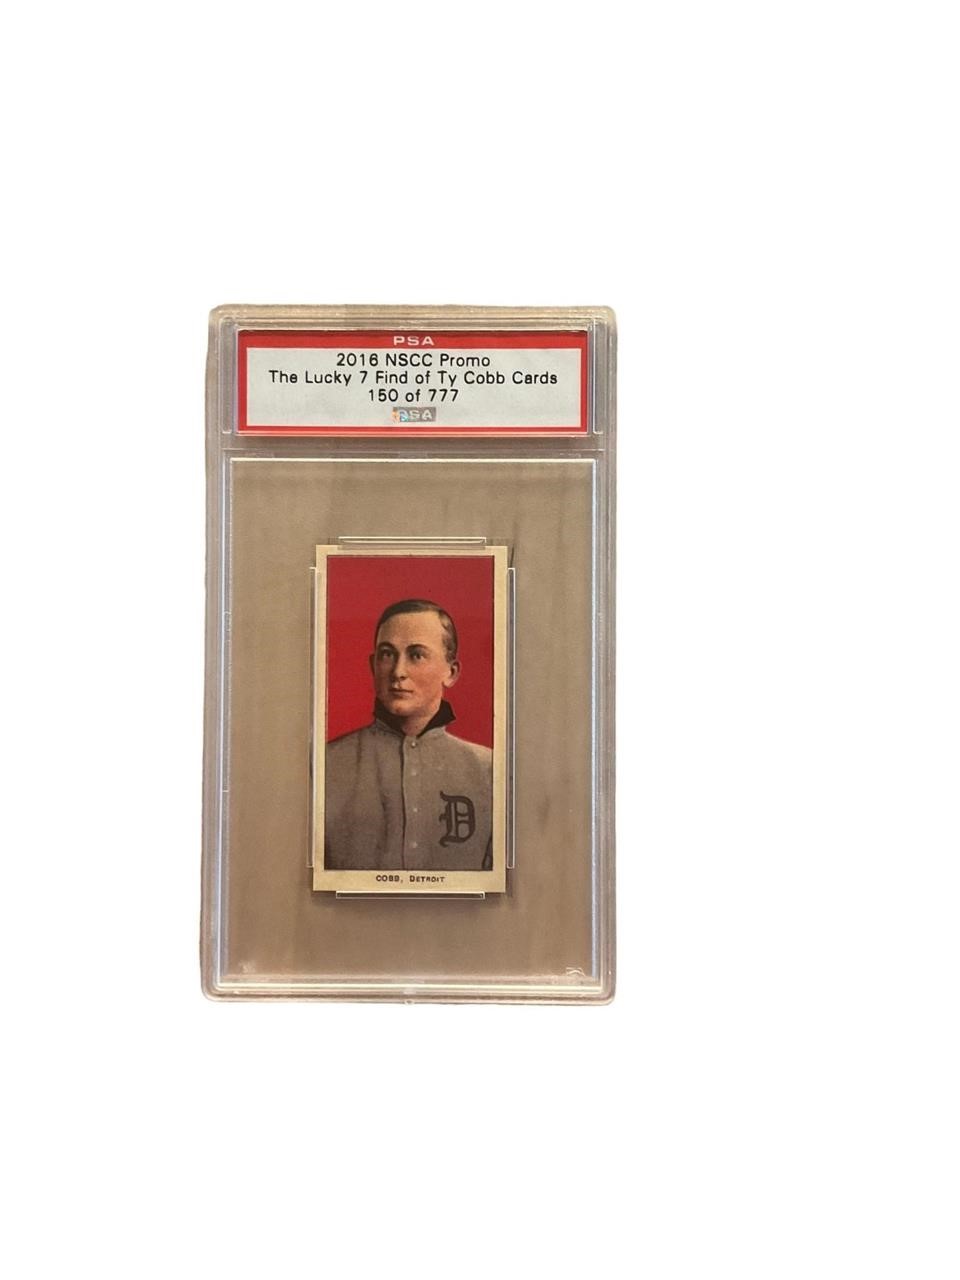 Graded Ty Cobb cards number 150